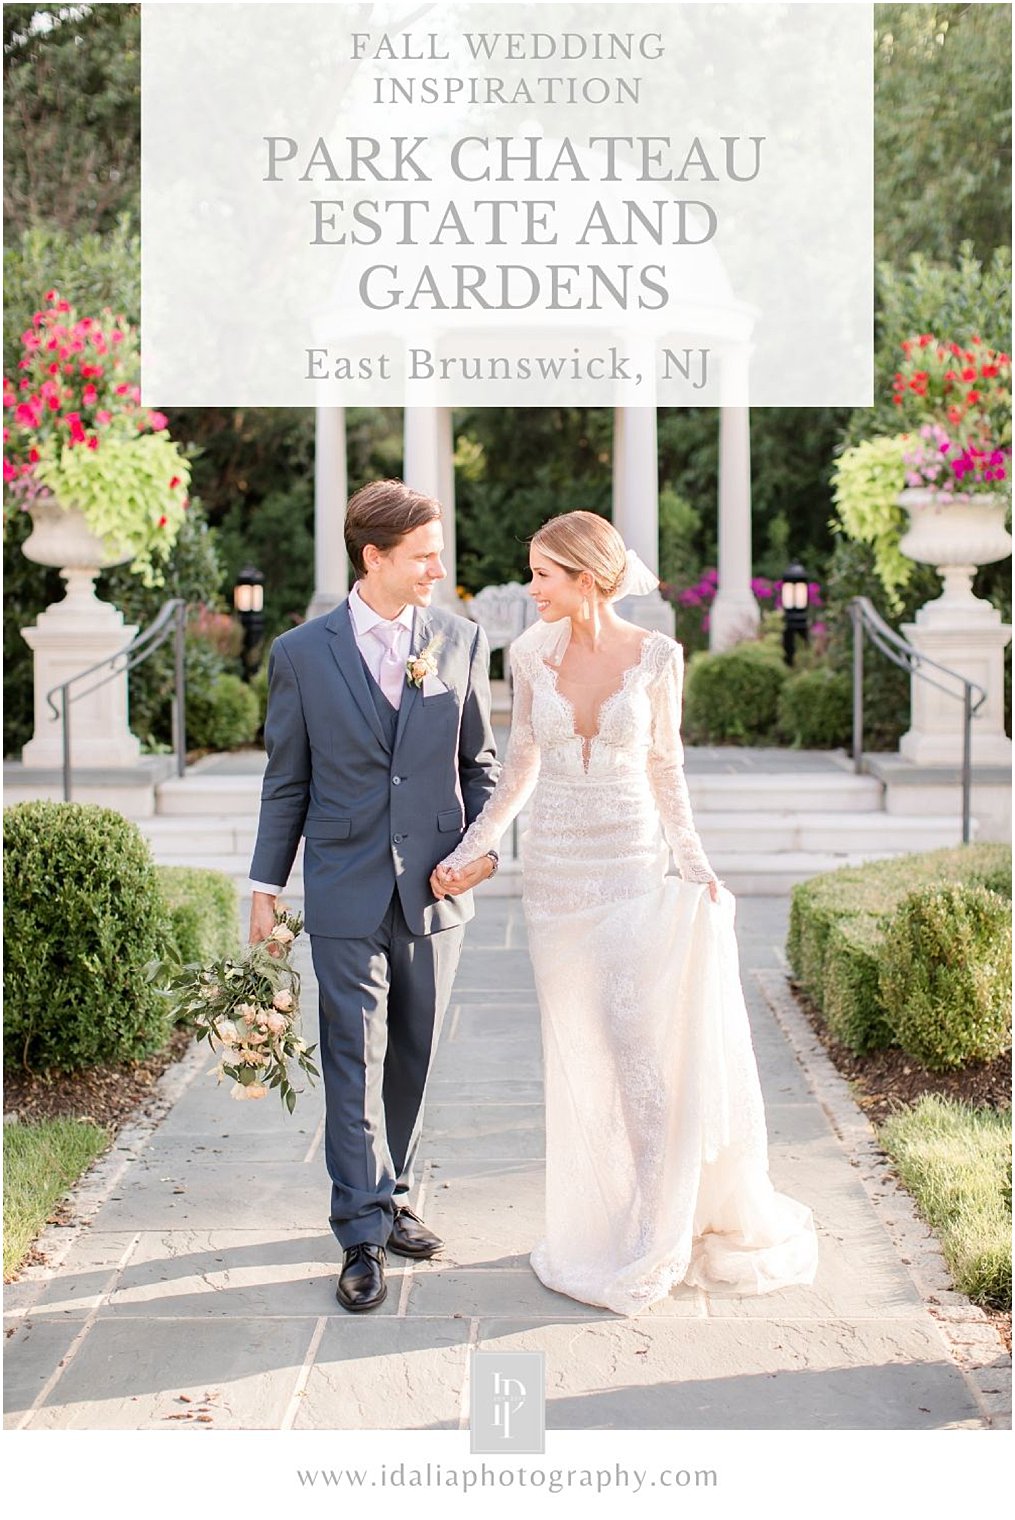 Styled Shoots Across America Shoot Crawl at Park Chateau Estate